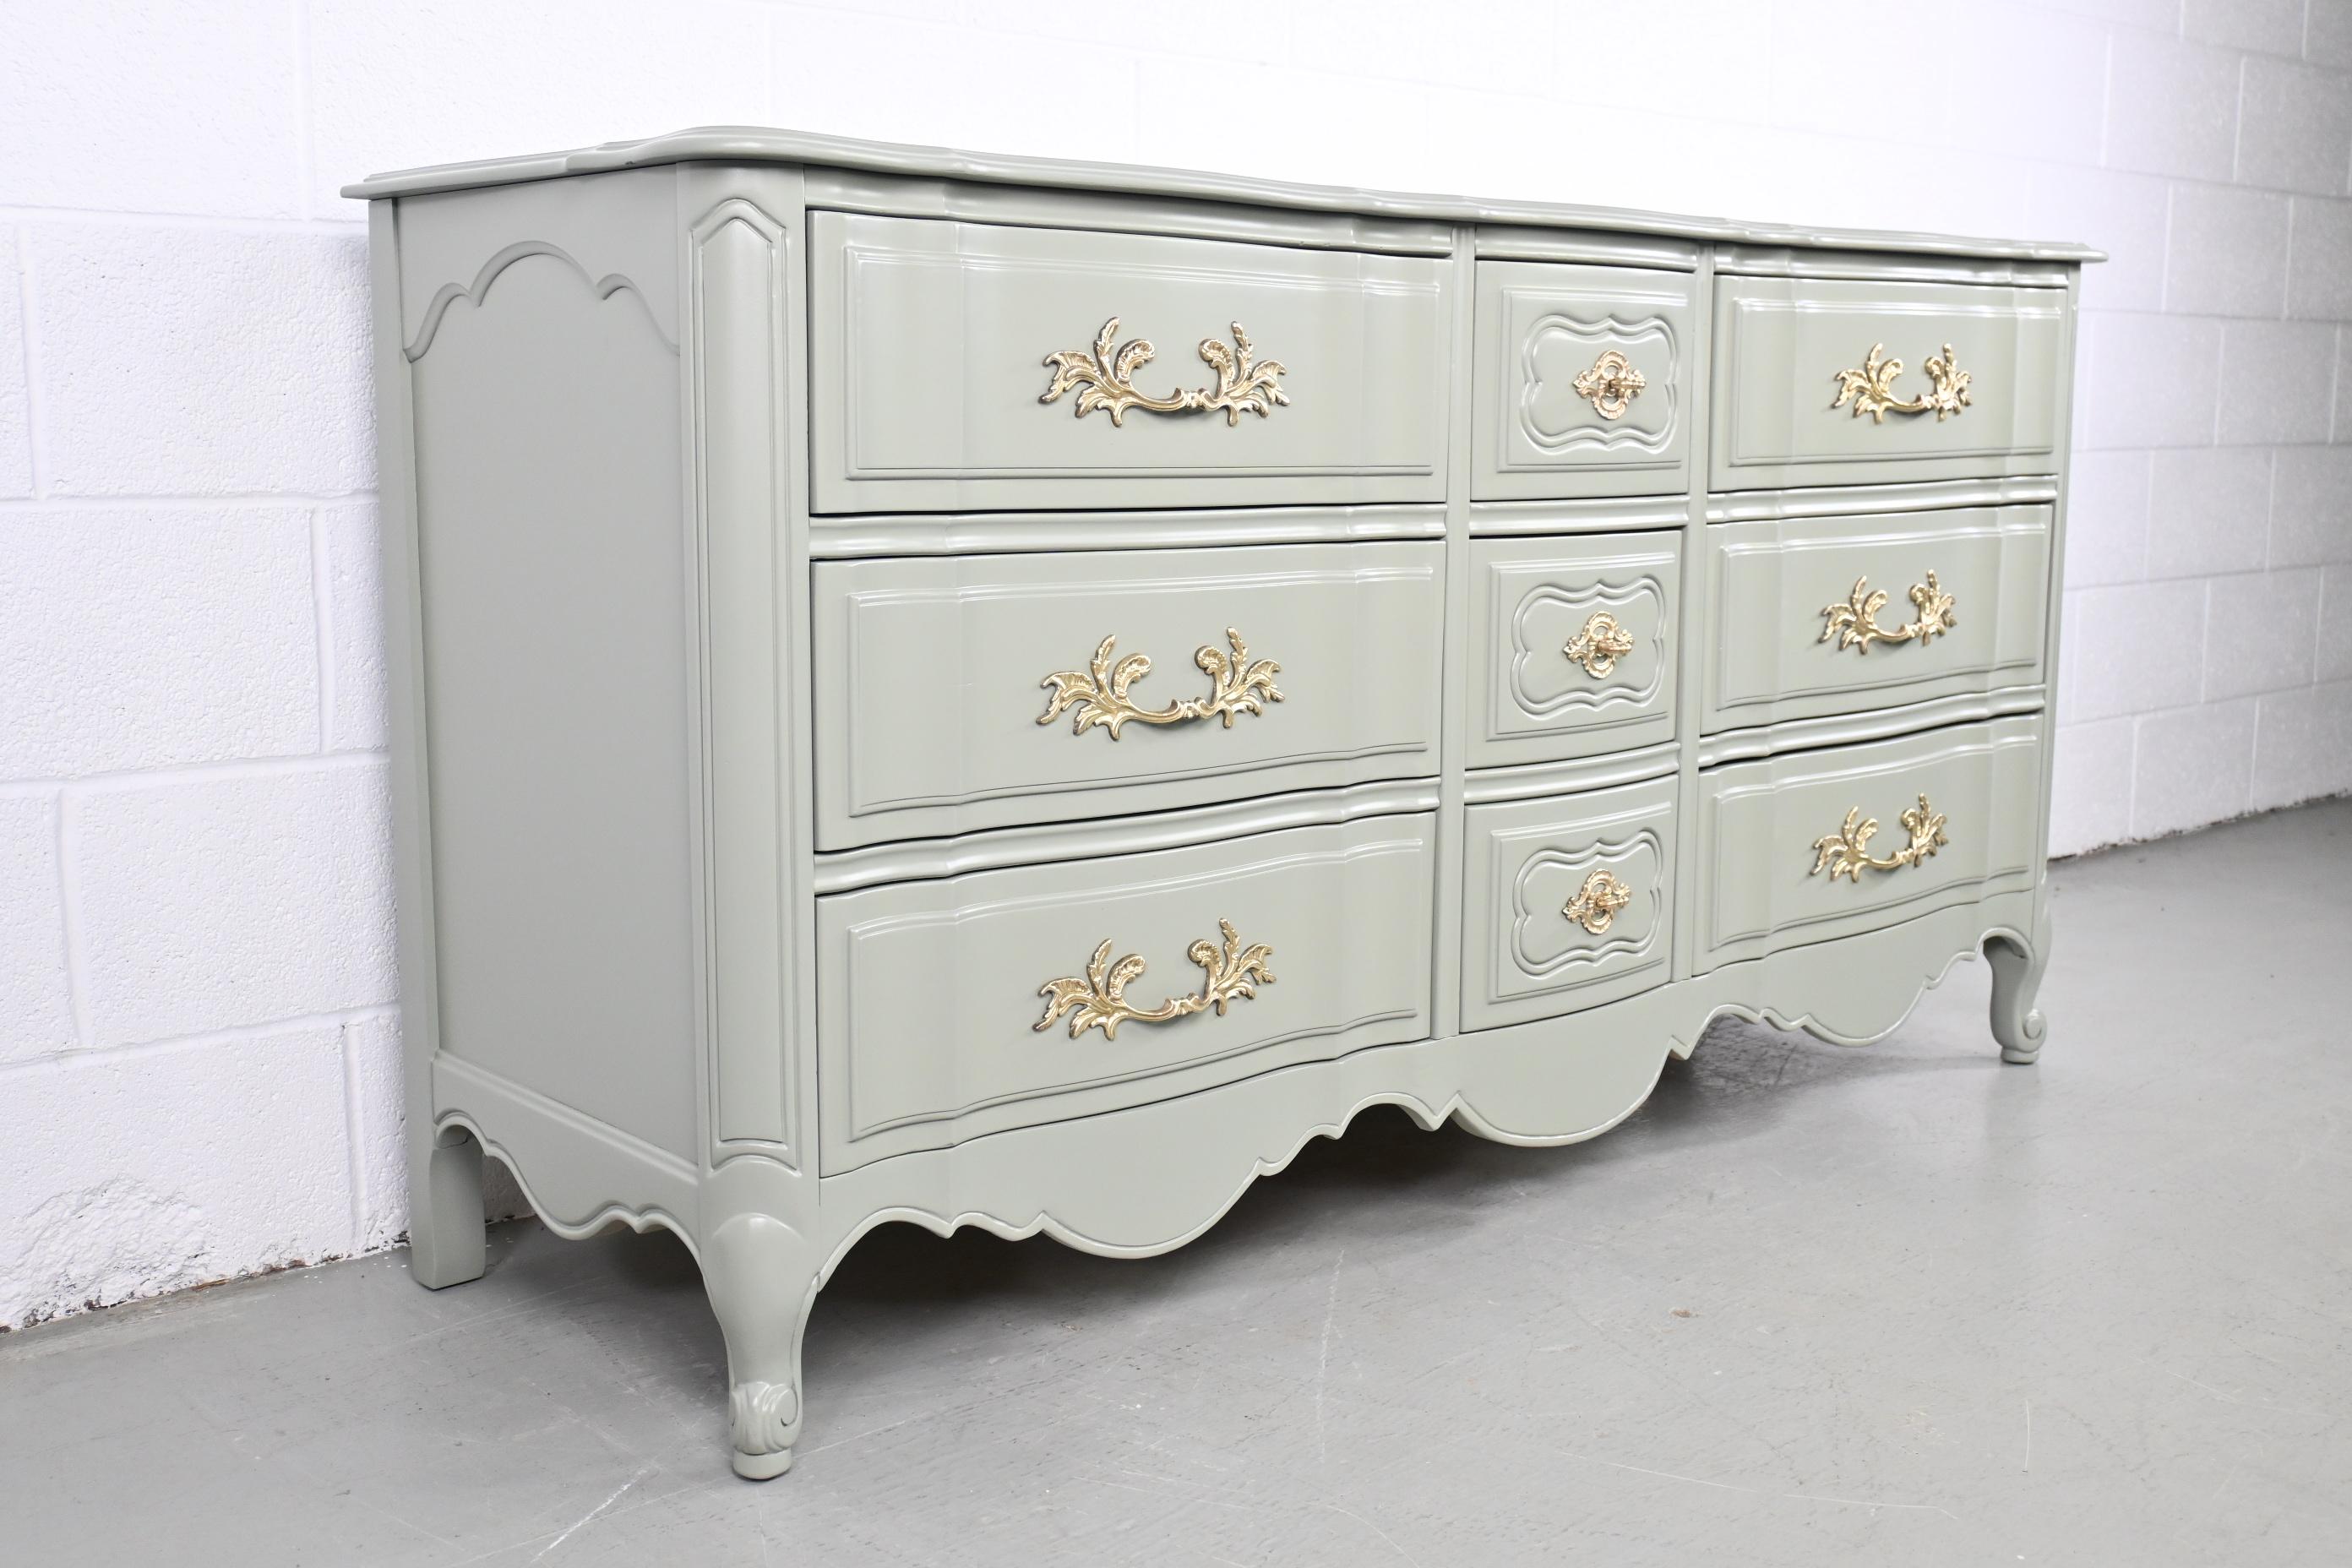 Thomasville Furniture French Provincial Light Green Nine Drawer Dresser

Thomasville Furniture, USA, 1990s

Measures: 64.5 Wide x 20.75 Deep x 33 High.

French provincial style nine drawer dresser refinished in Sherwin Williams' 